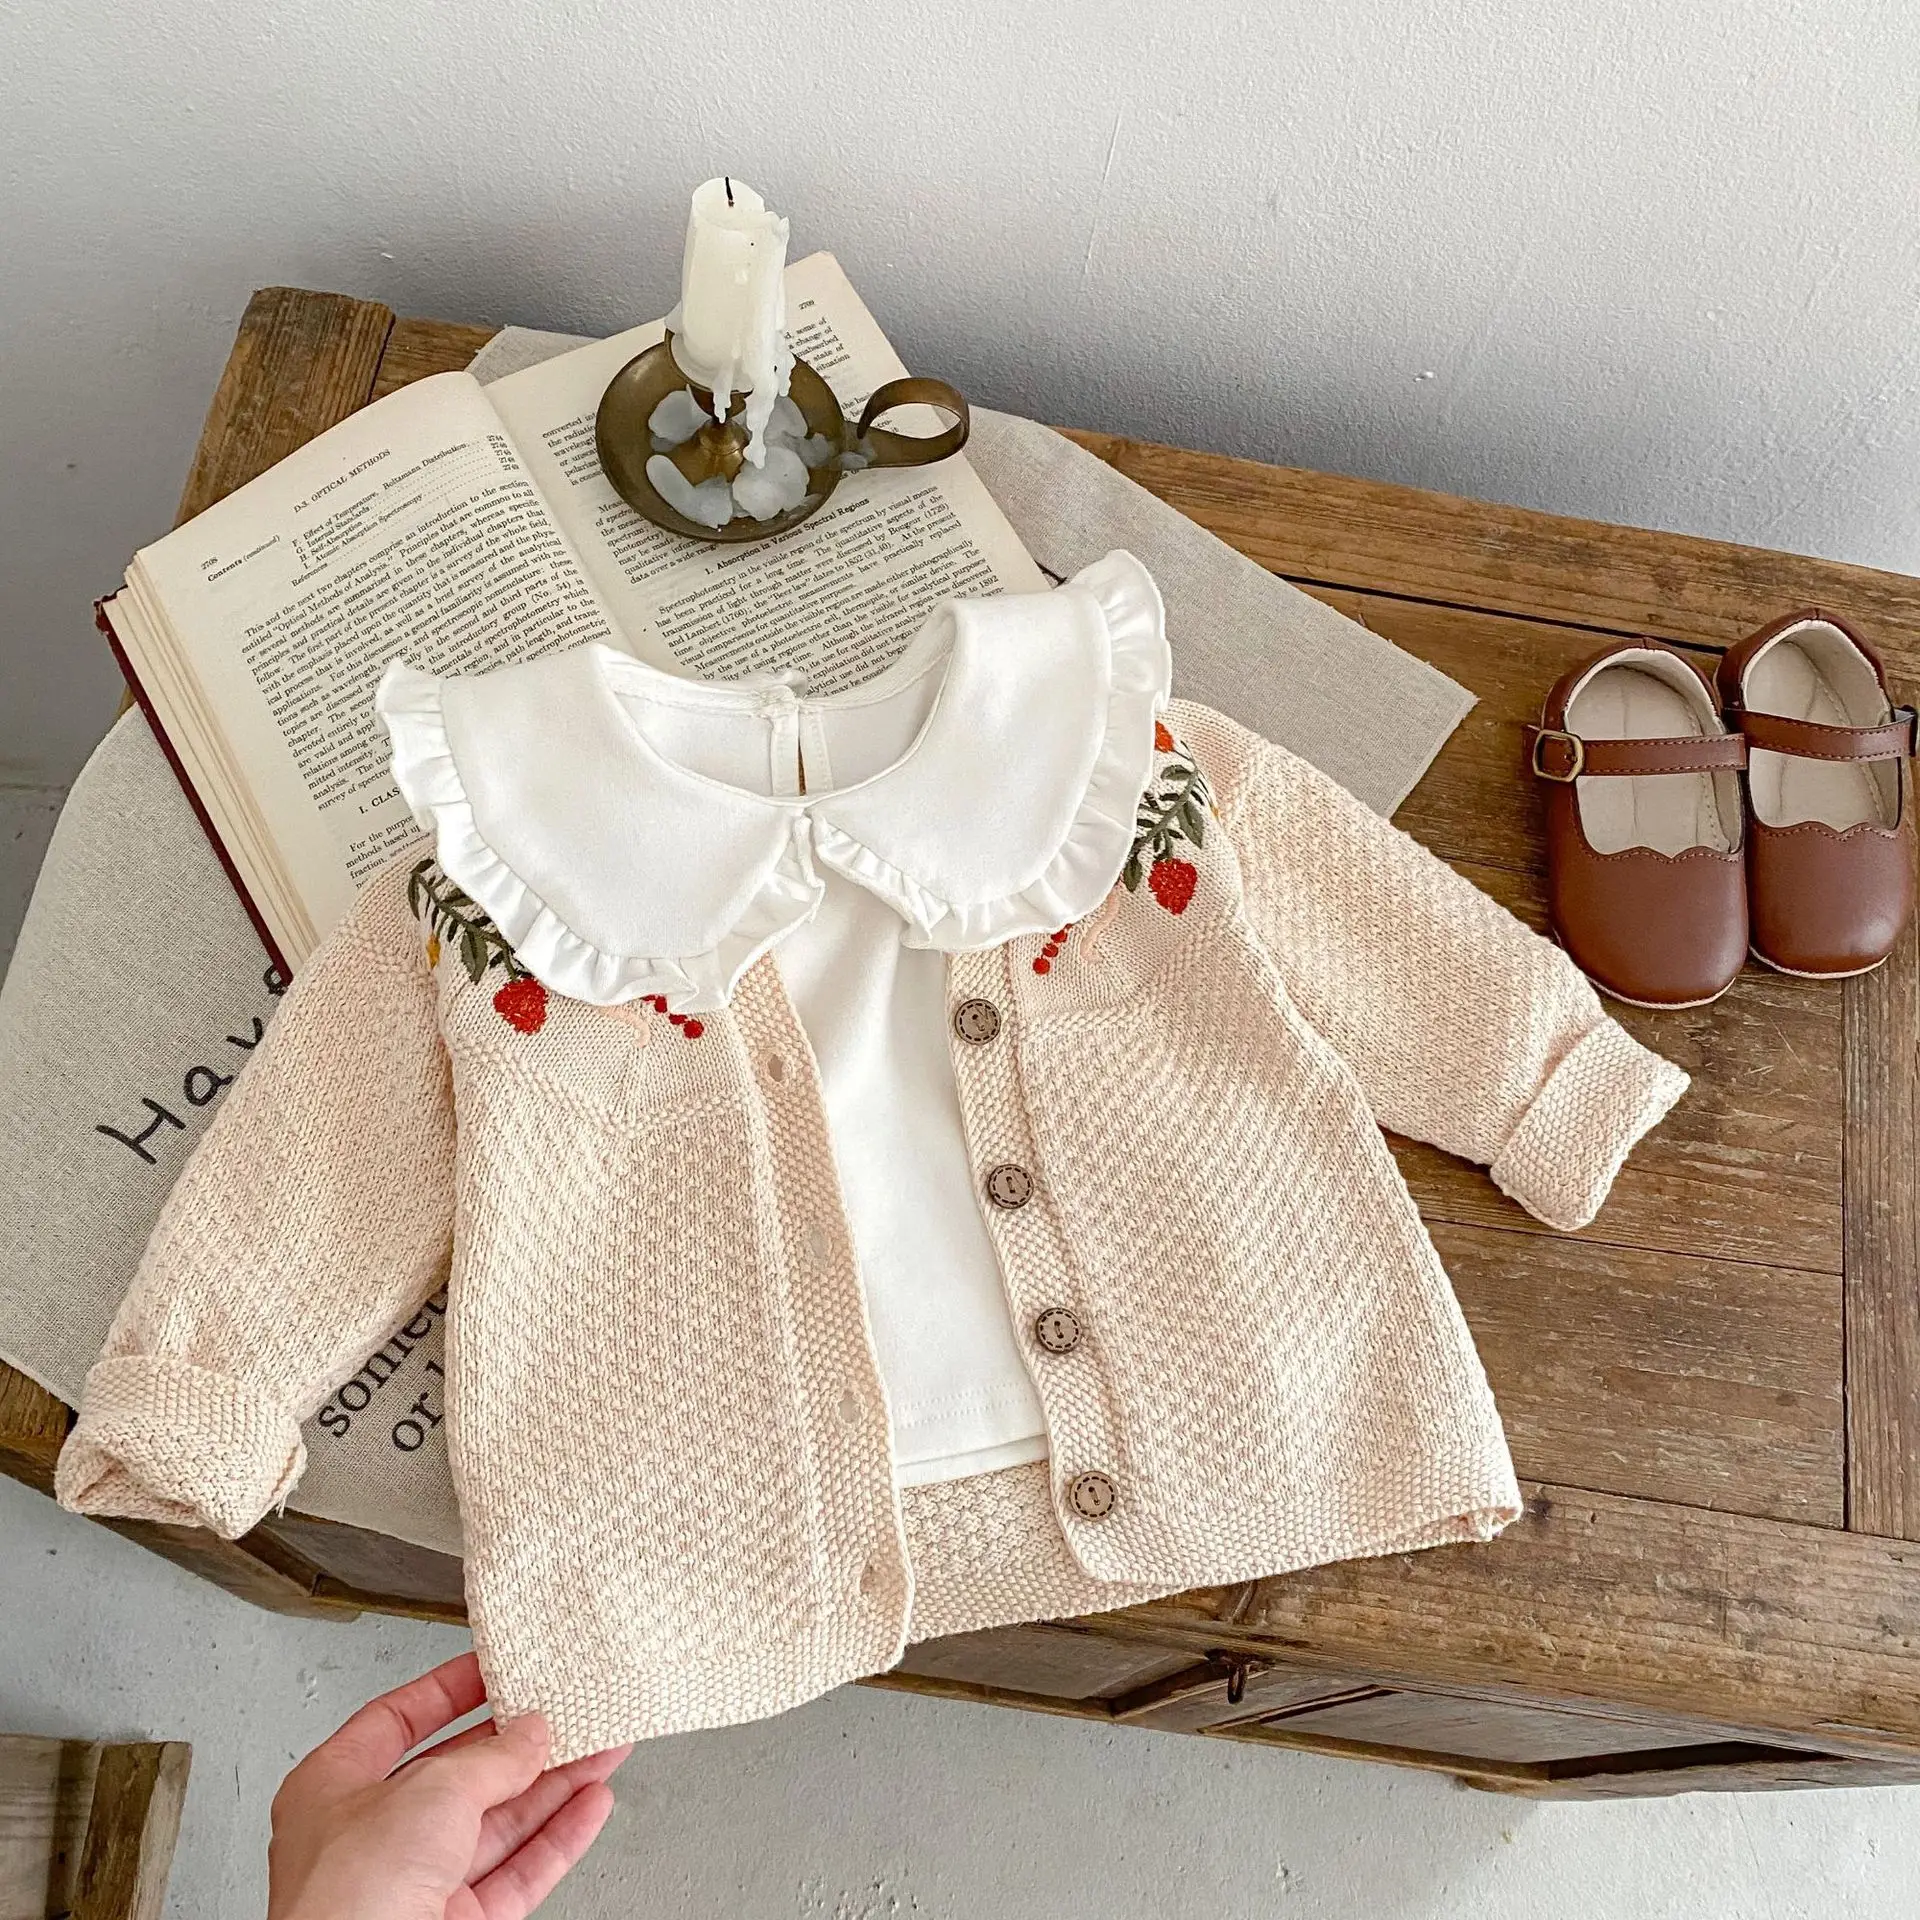 Engepapa 0-3 years old Autumn infant floral knit cardigan newborn knitted sweater baby girl clothes